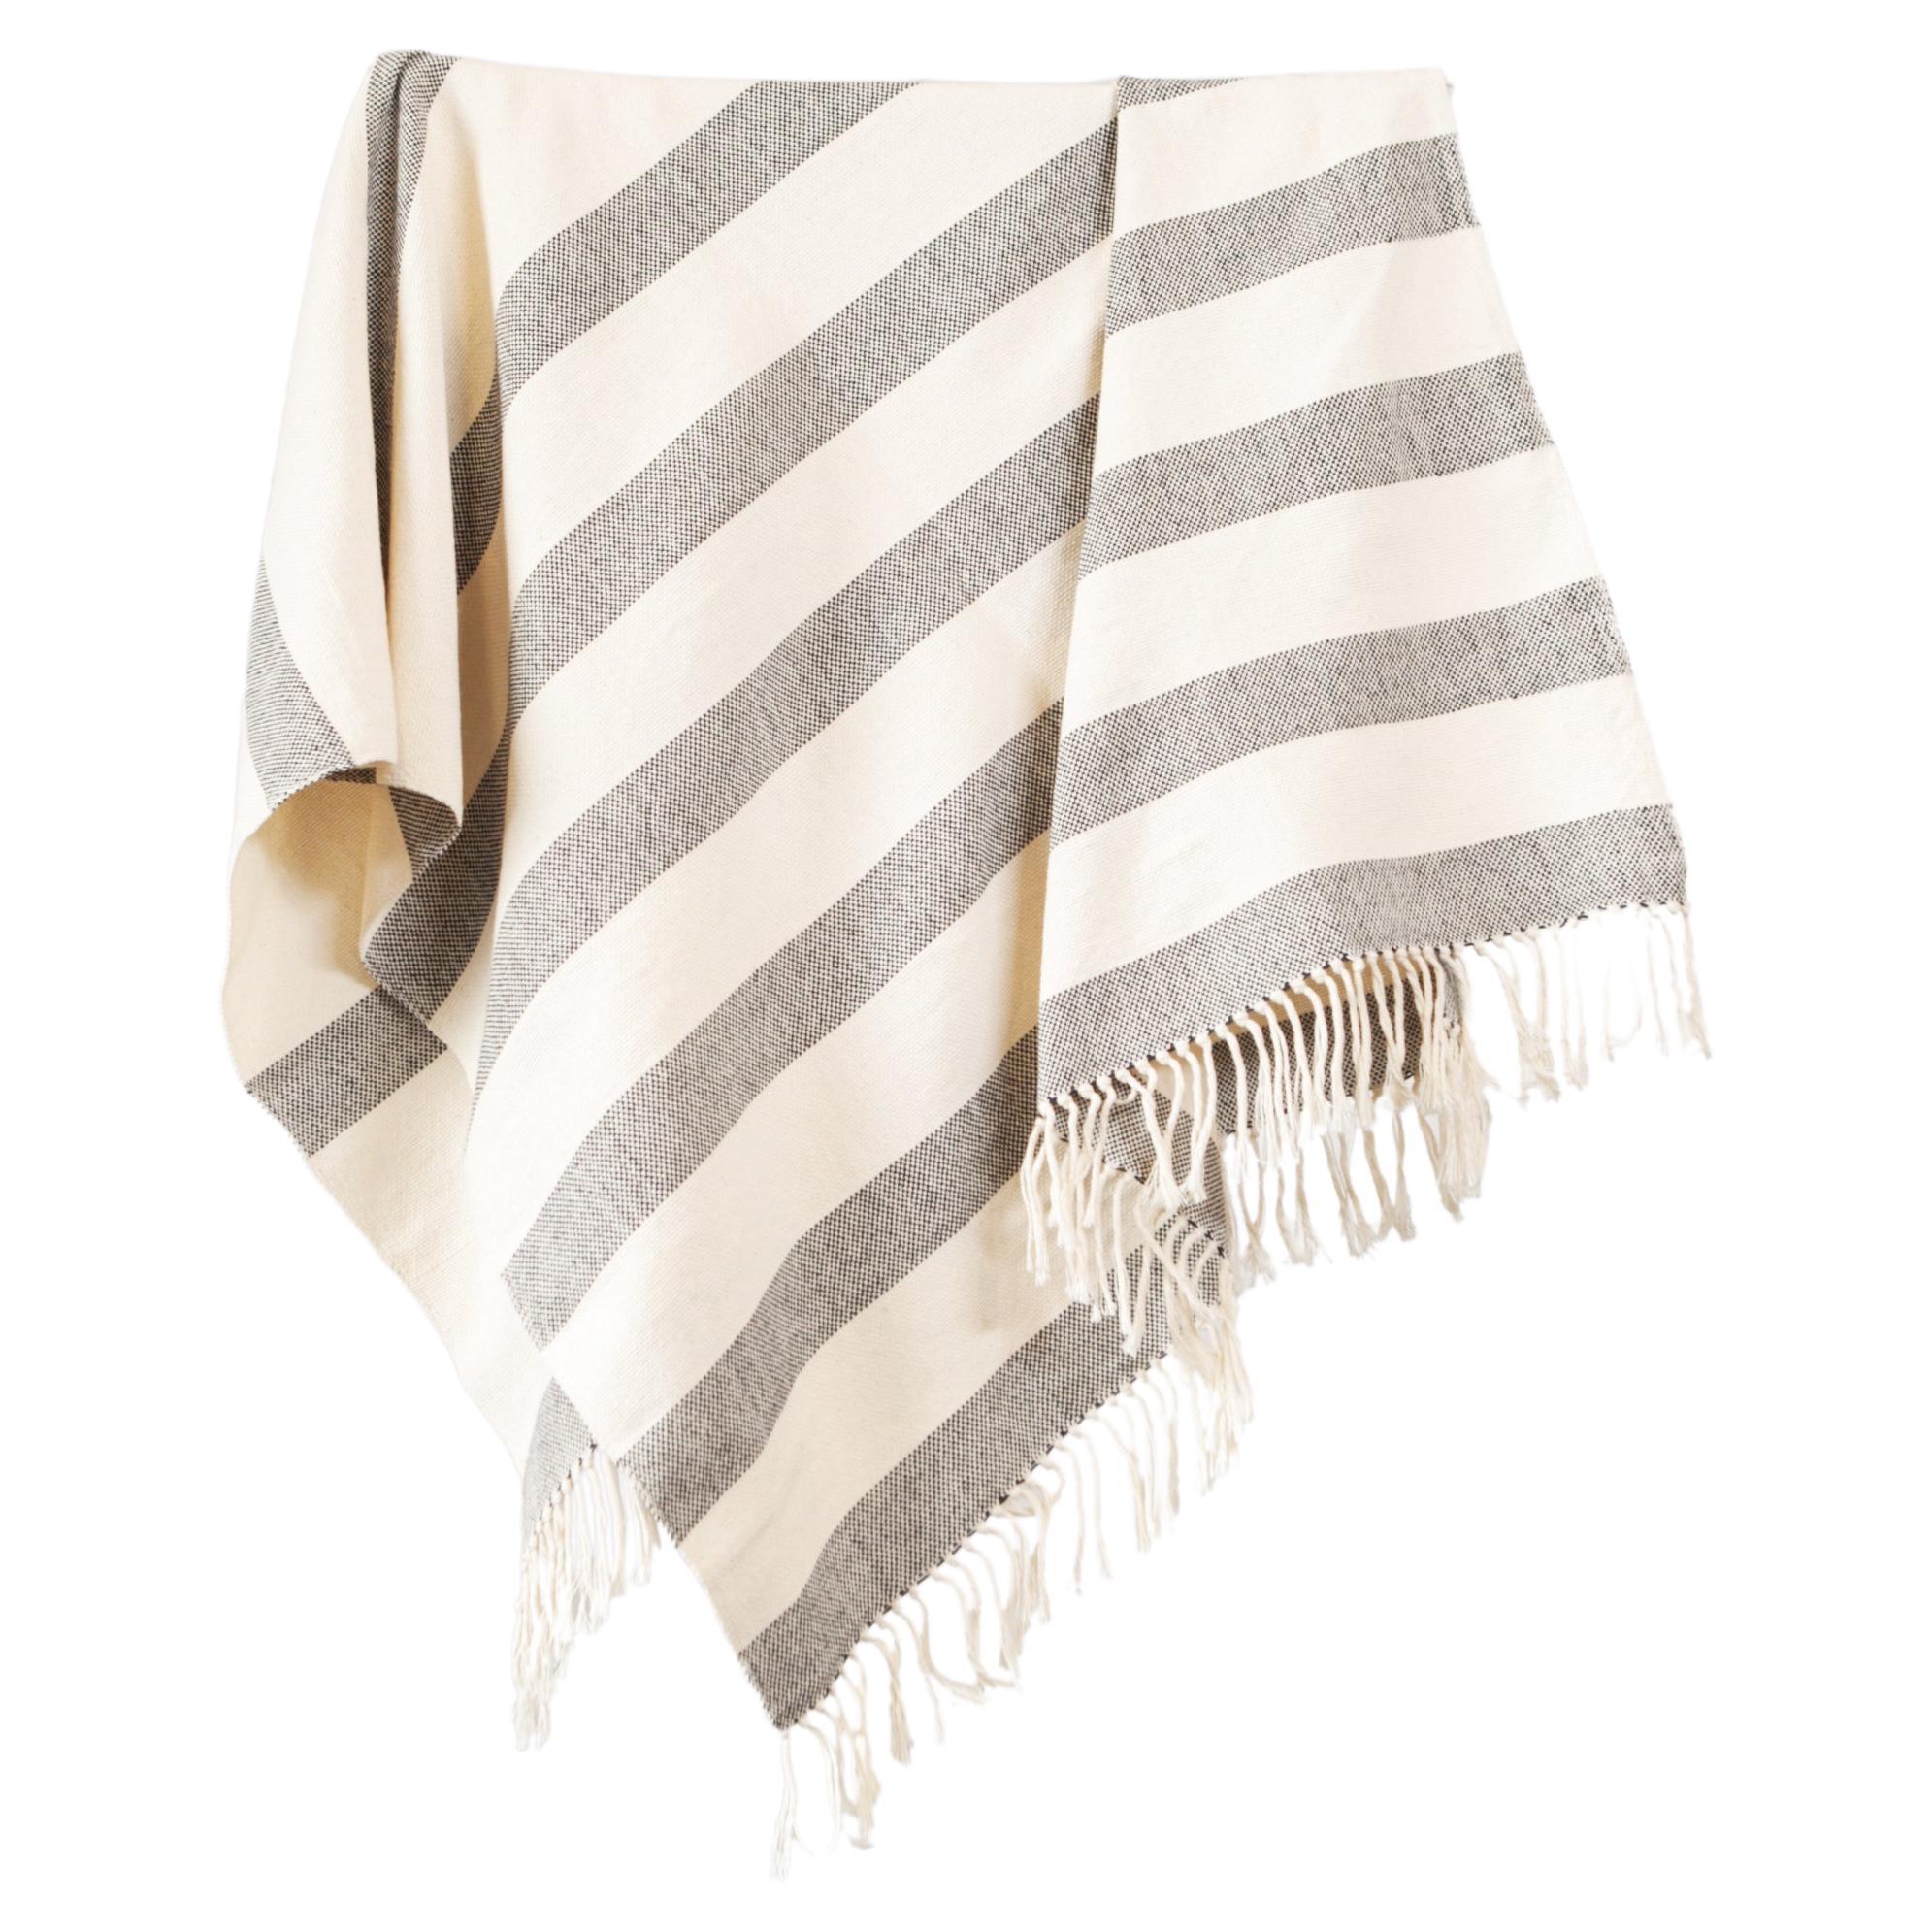 Handwoven Cotton Throw in Natural and Gray Gradient Stripe, in Stock For Sale